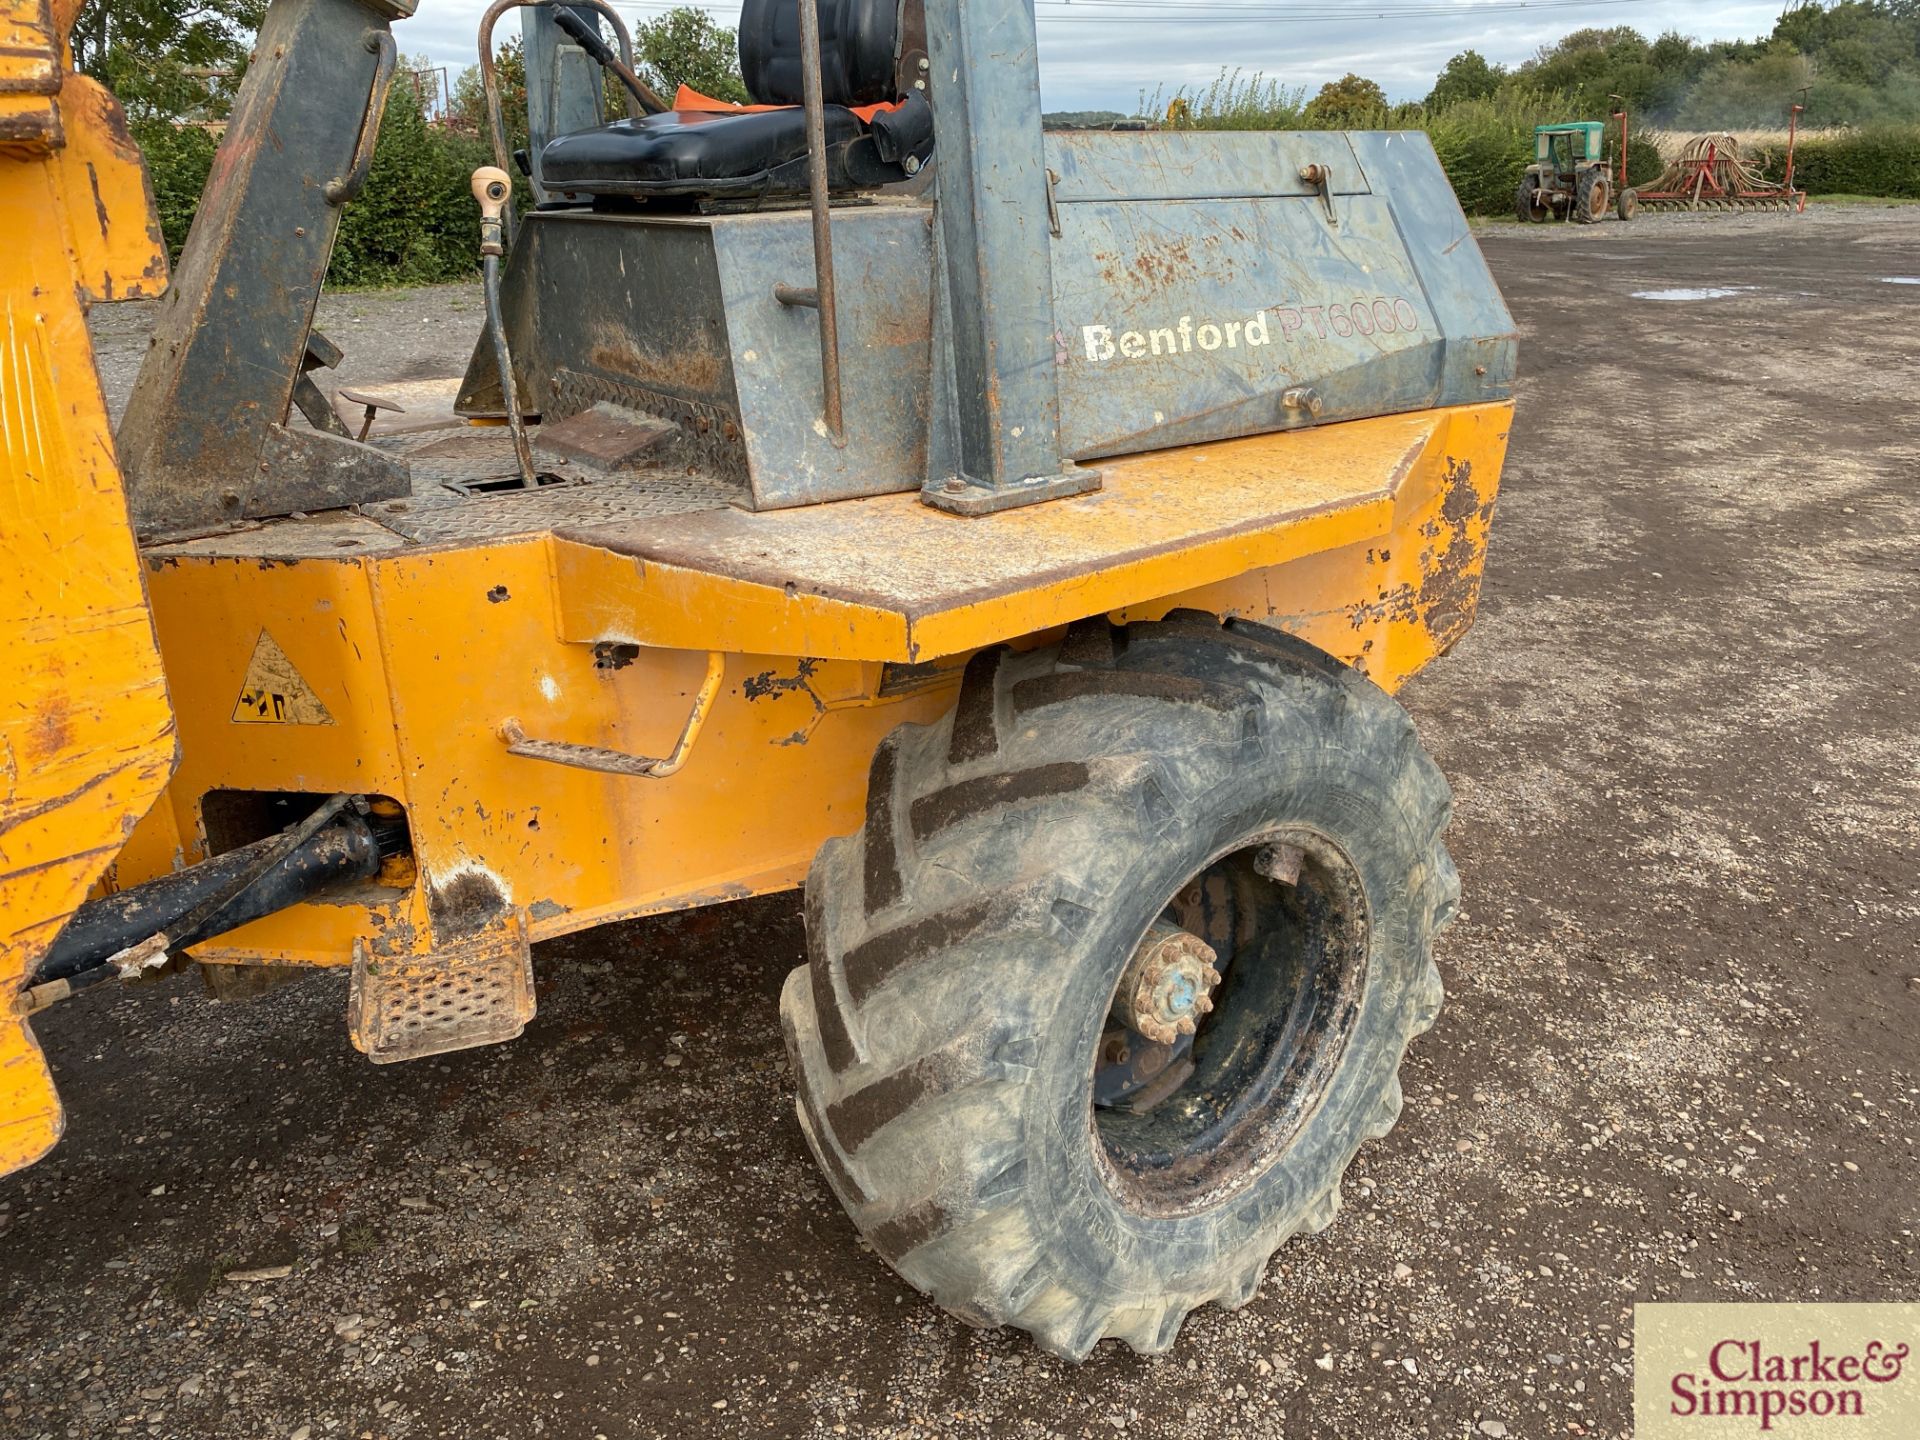 Benford 6T 4WD pivot steer dumper. 2000. Serial number SLBDNOOEY7H0721. 405/70R20 wheels and - Image 12 of 36